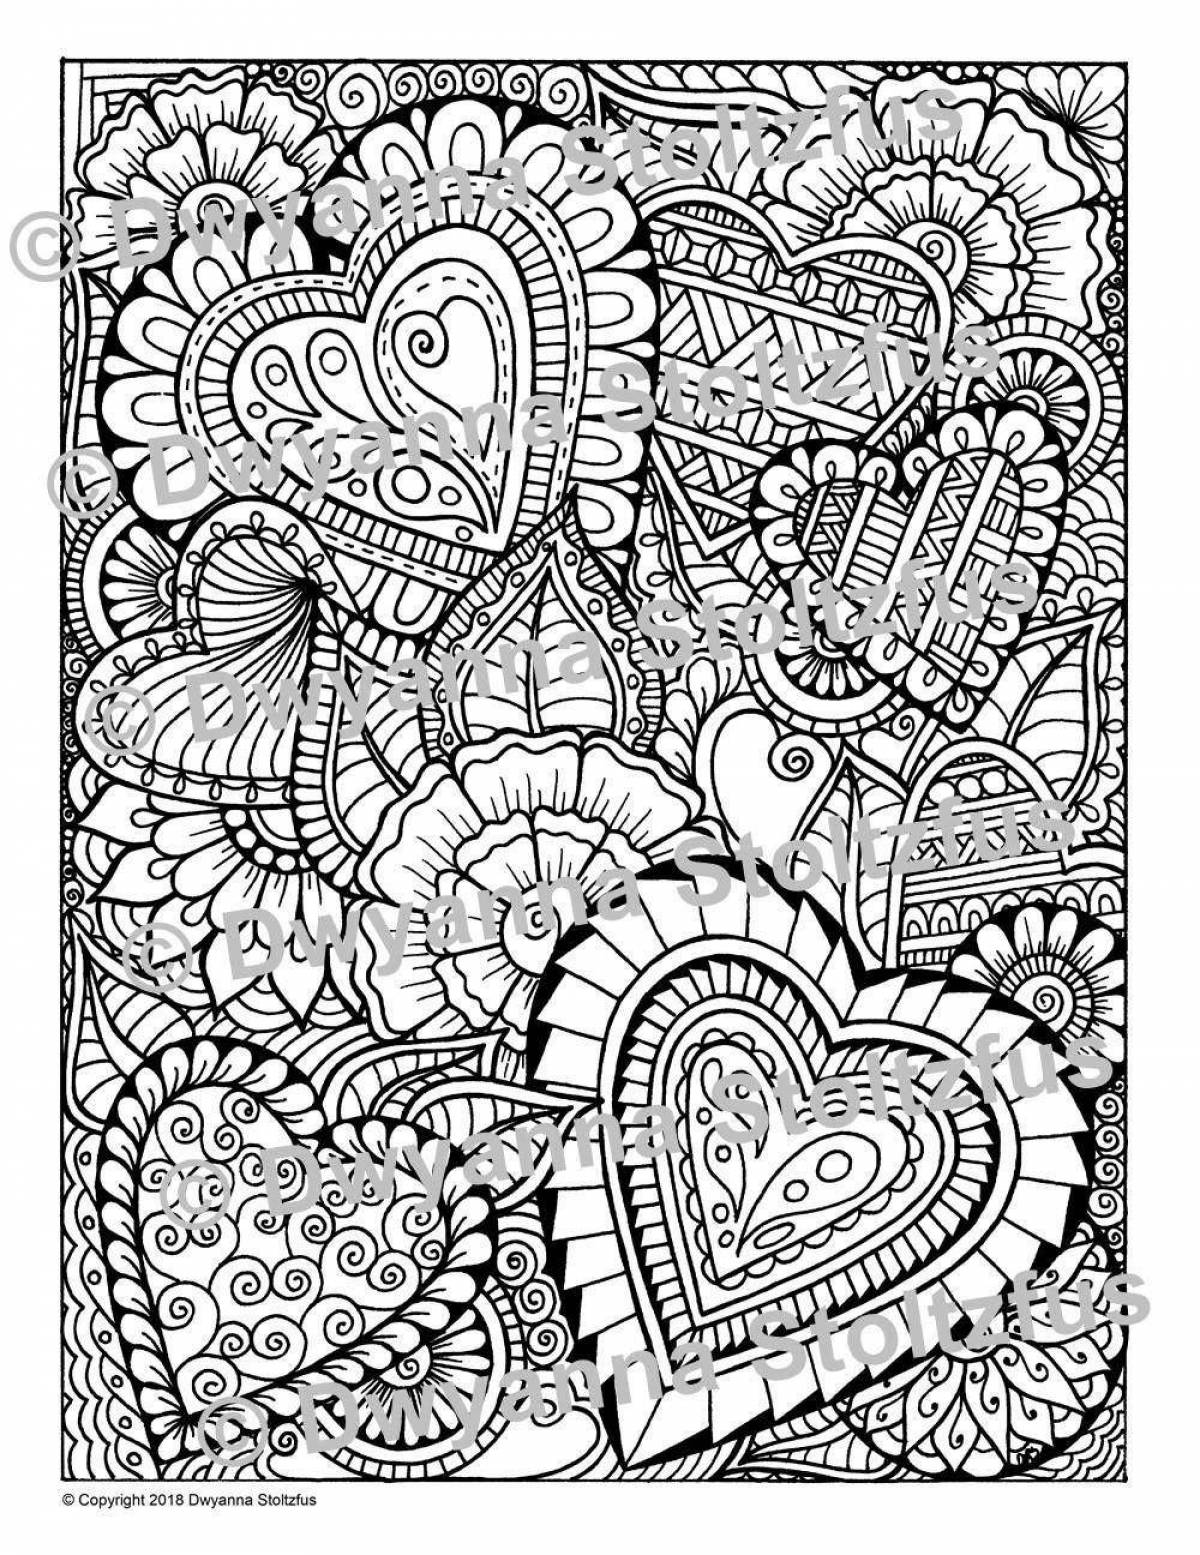 Harmonious coloring for adults